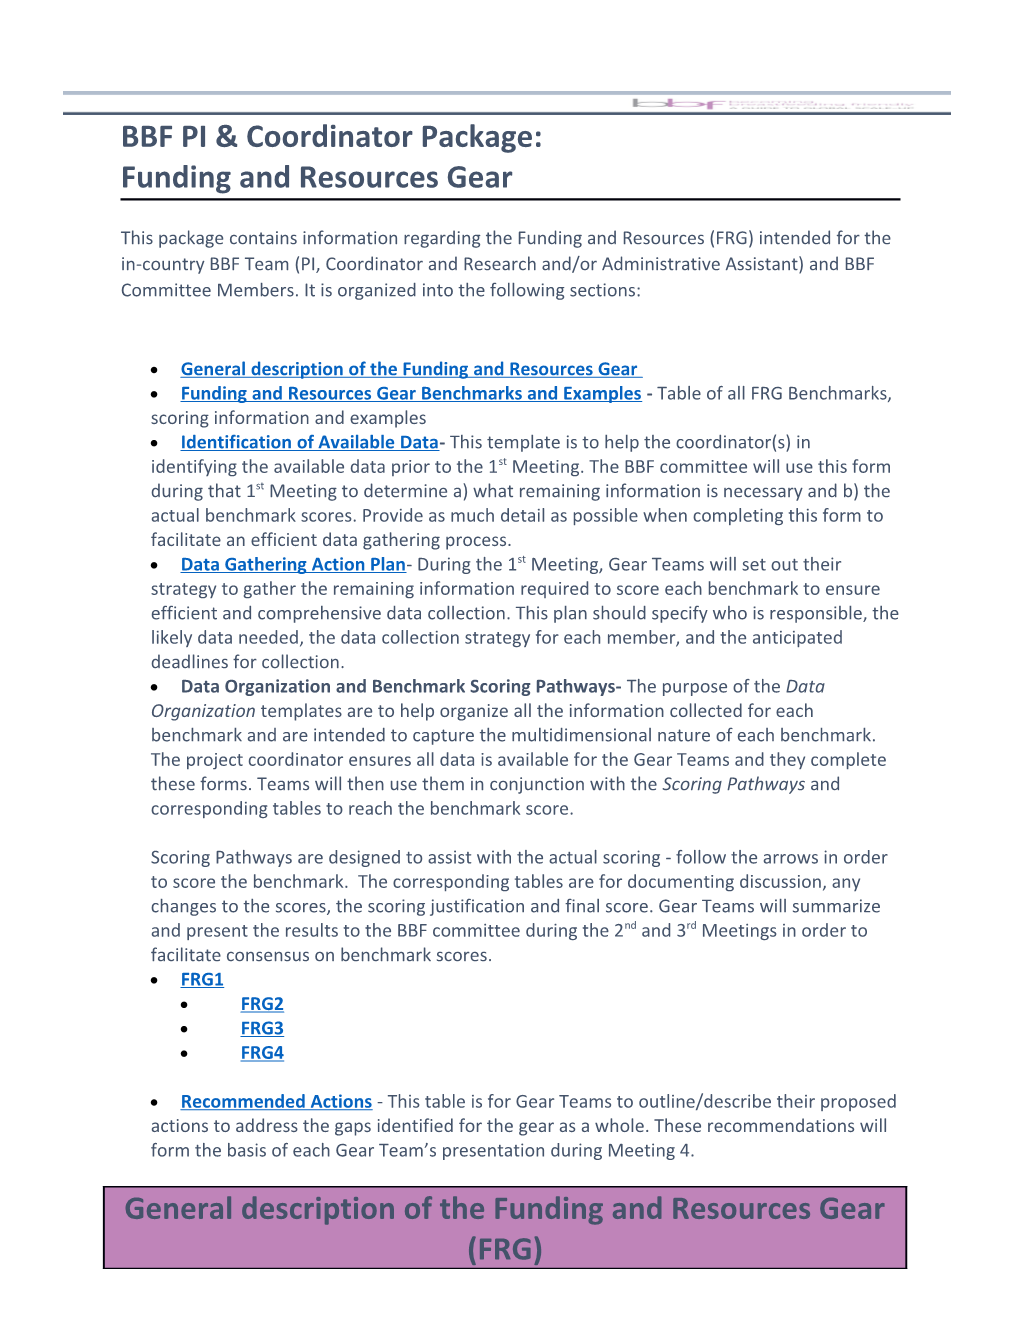 Funding and Resources Gear